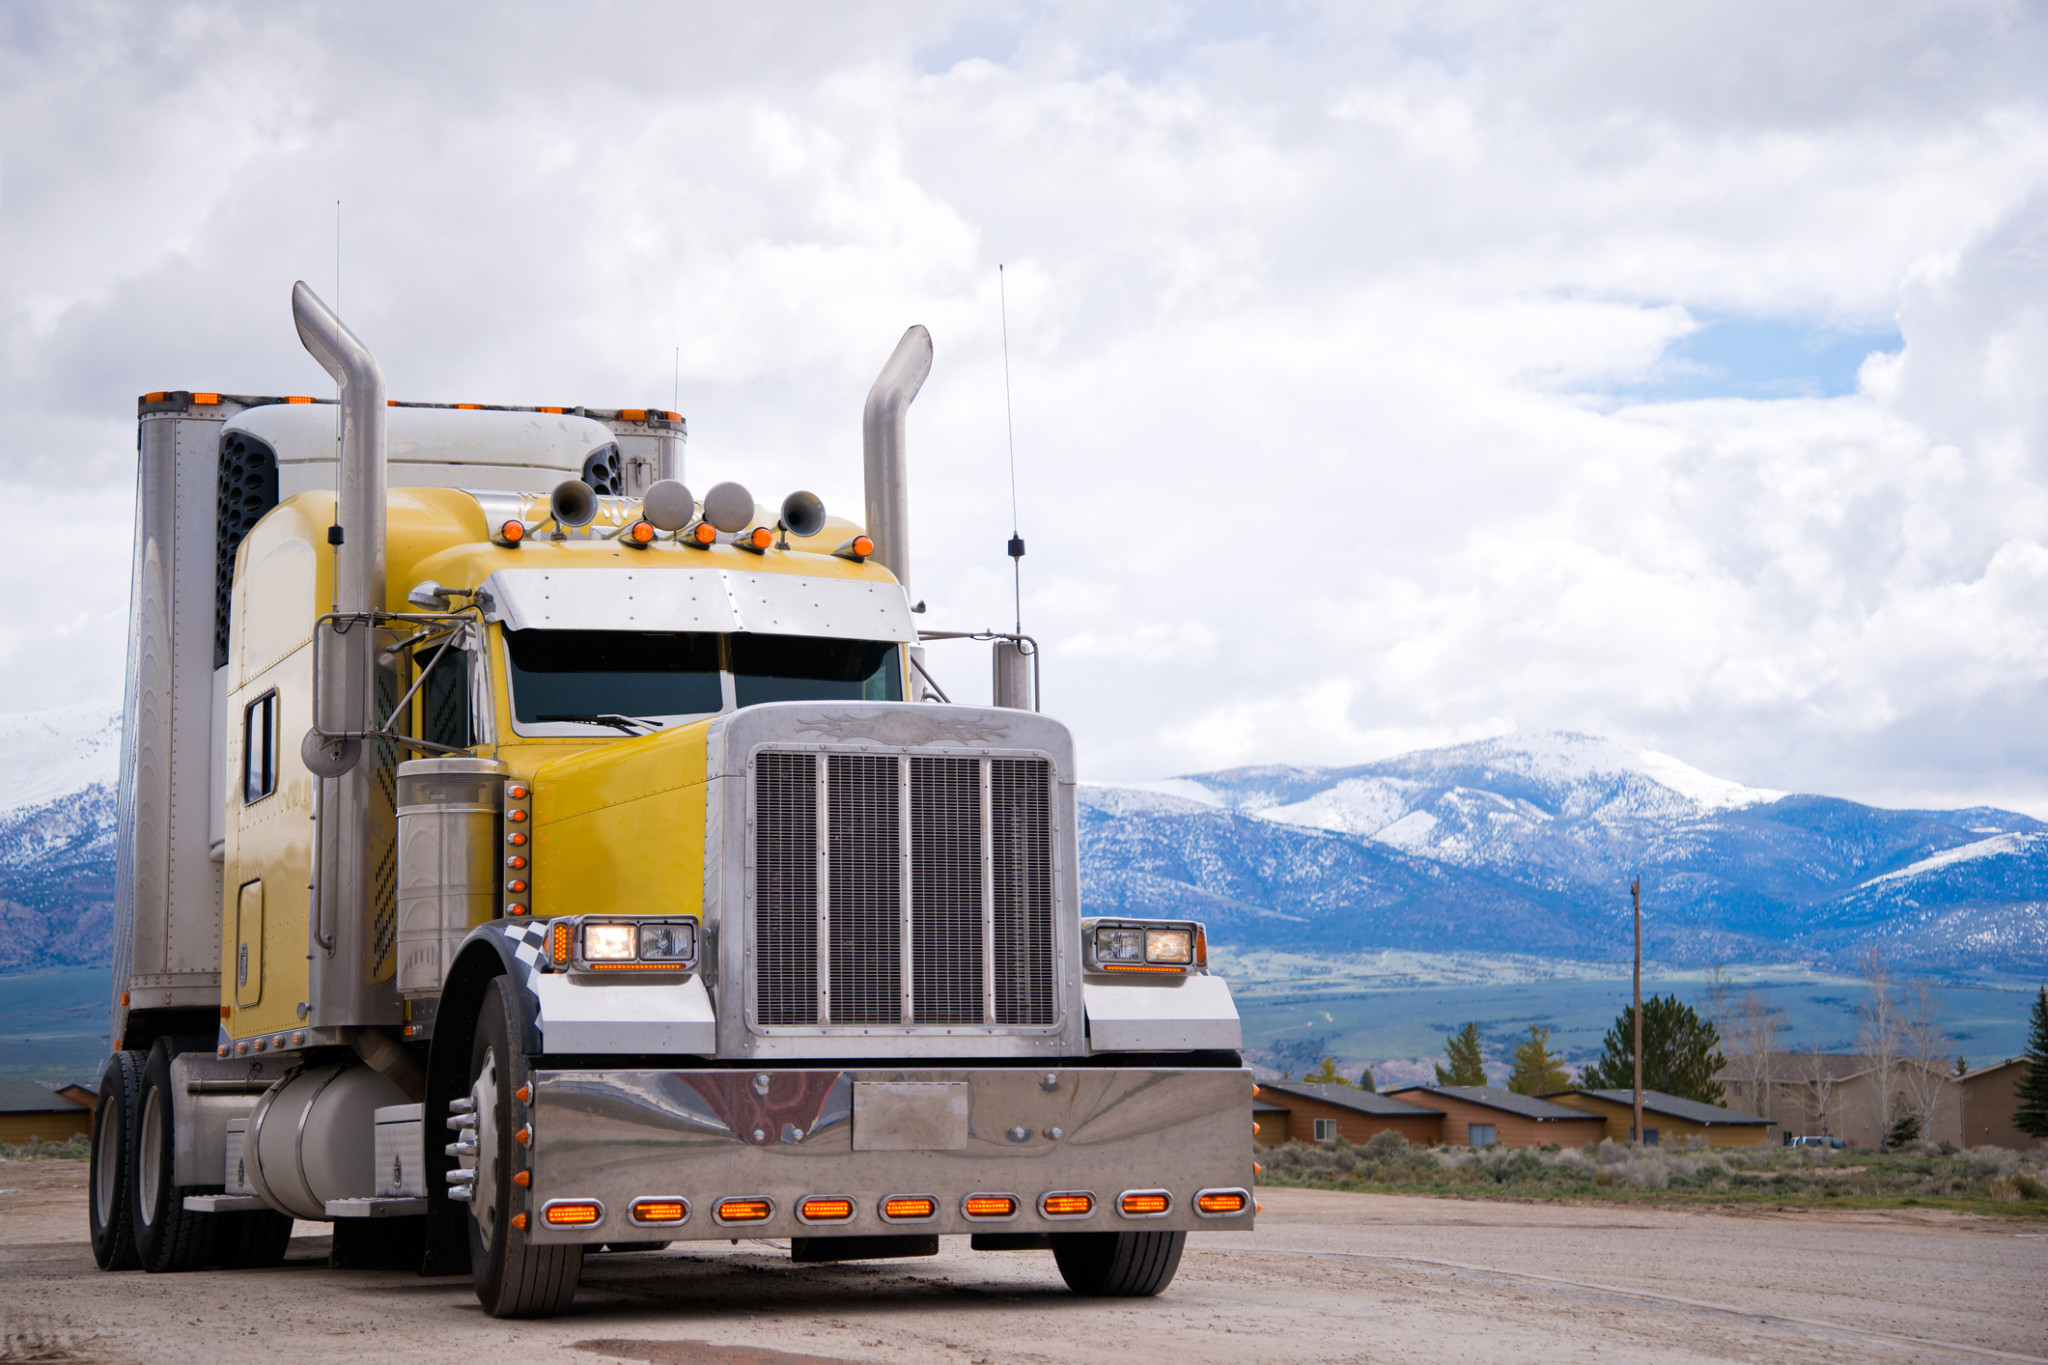 Trucking Company Insurance | Yellow big rig semi truck on rural road against mountain backdrop